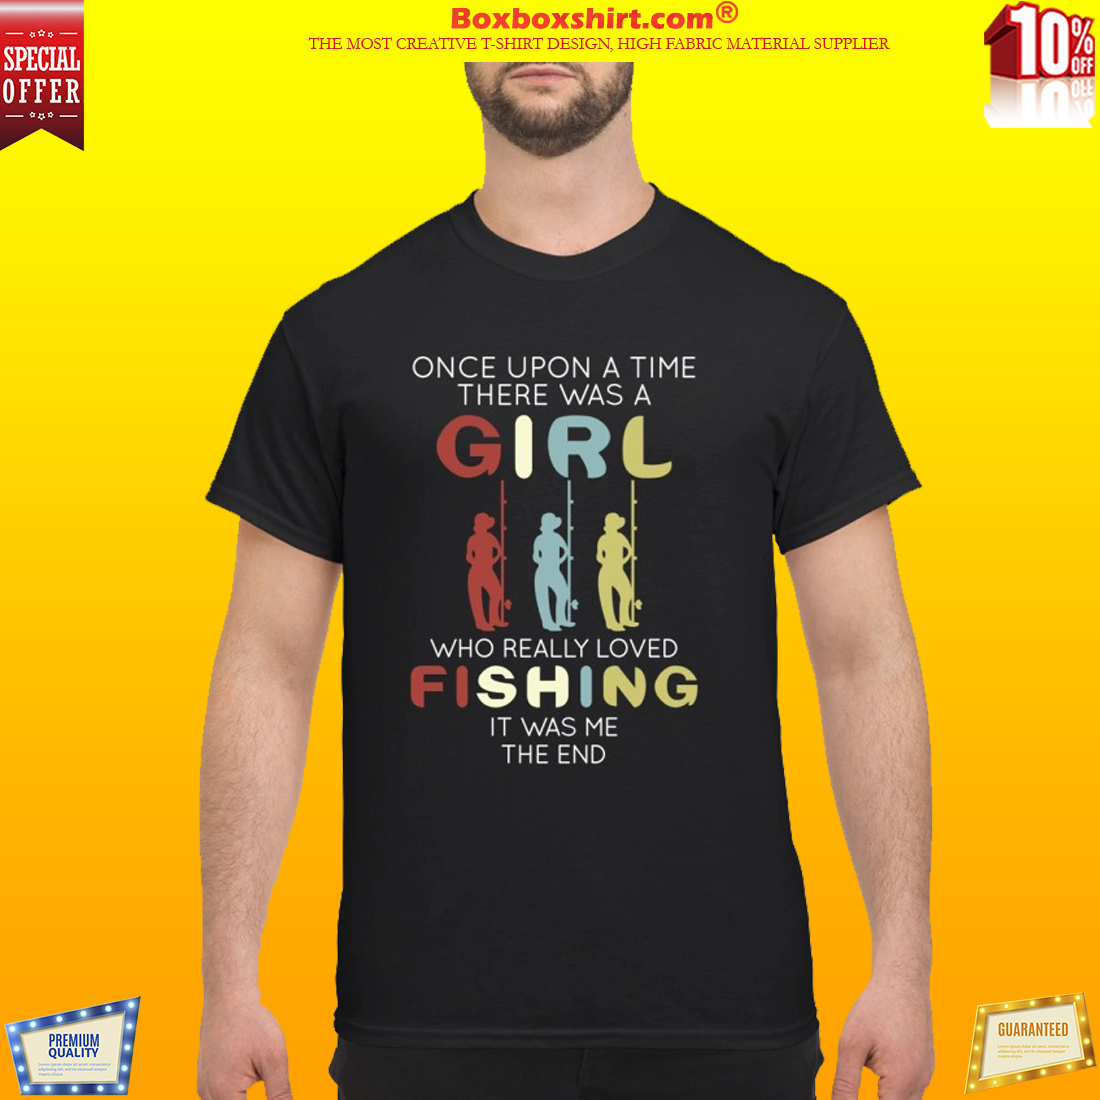 One upon a time there was a girl who loved fishing it was me classic shirt